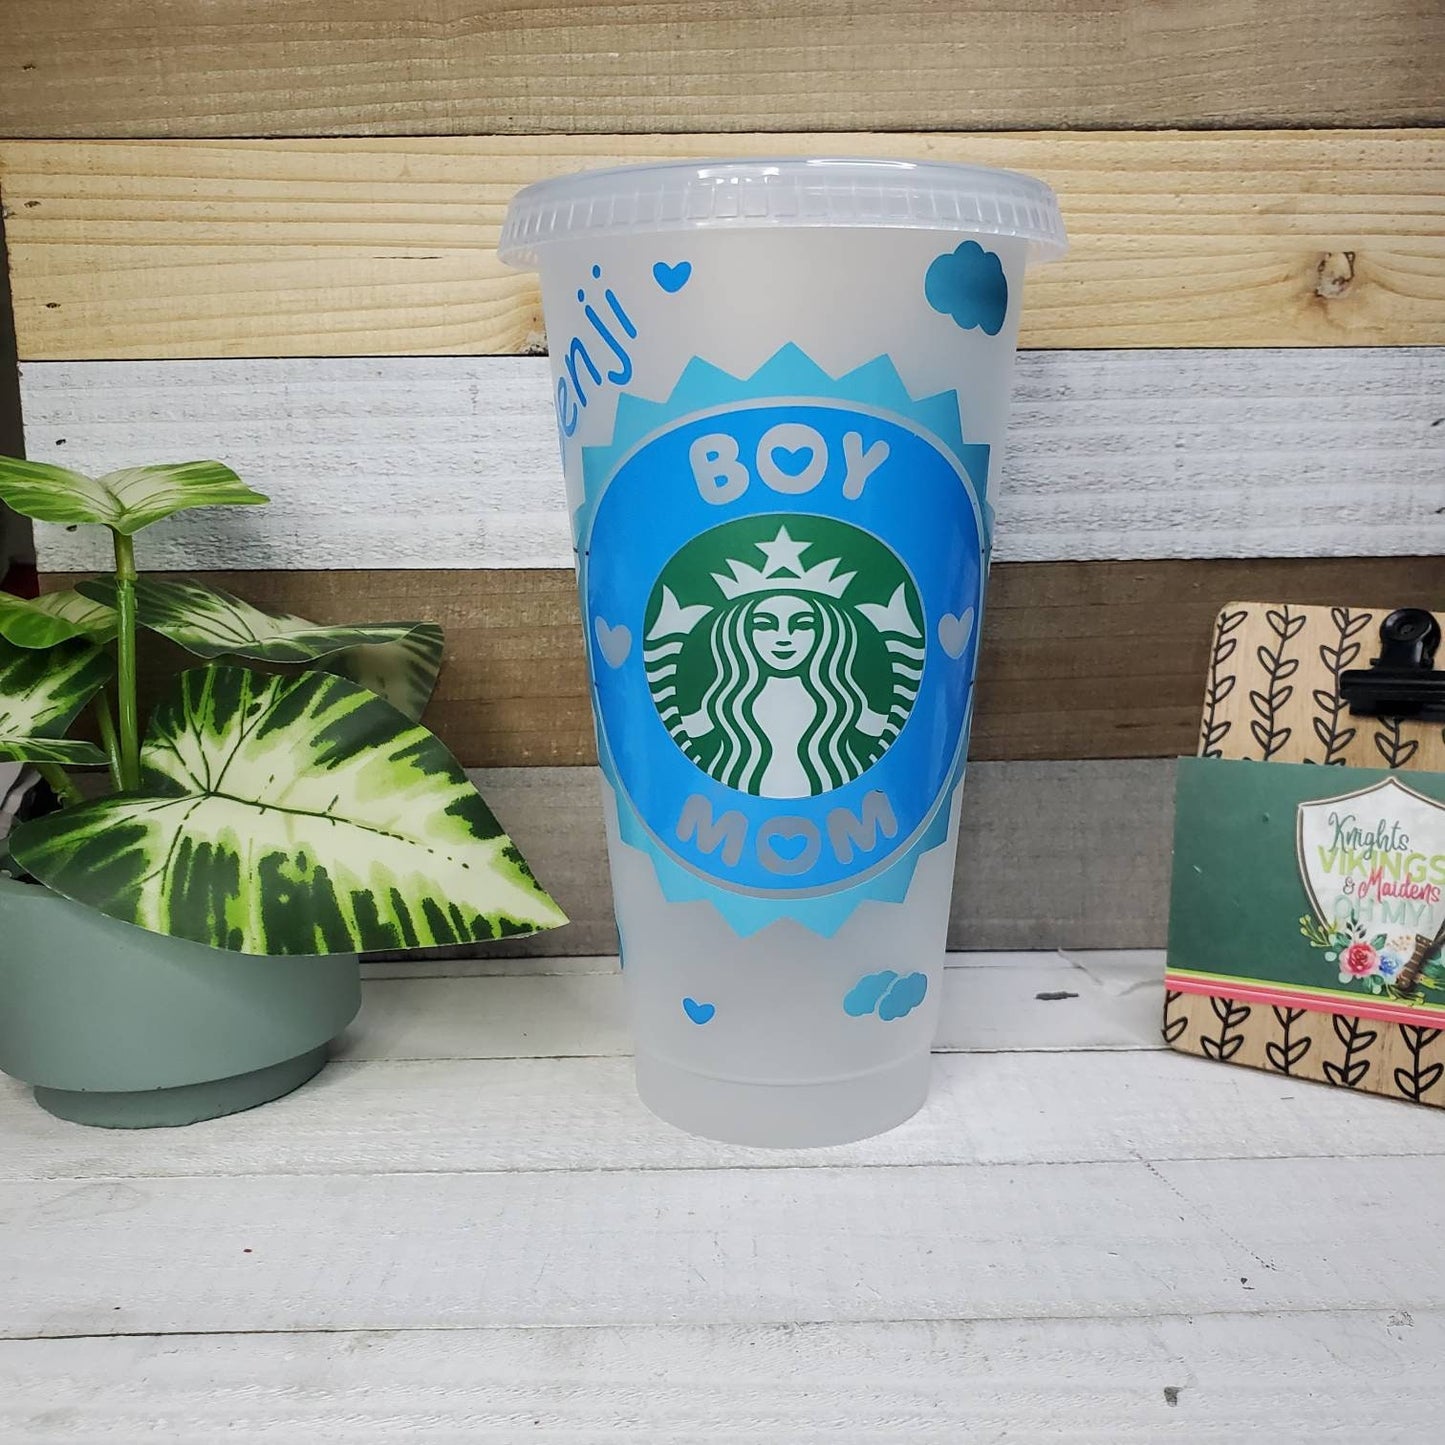 Mom Fuel Custom Starbucks Cup Mothers Day Gift Mom 